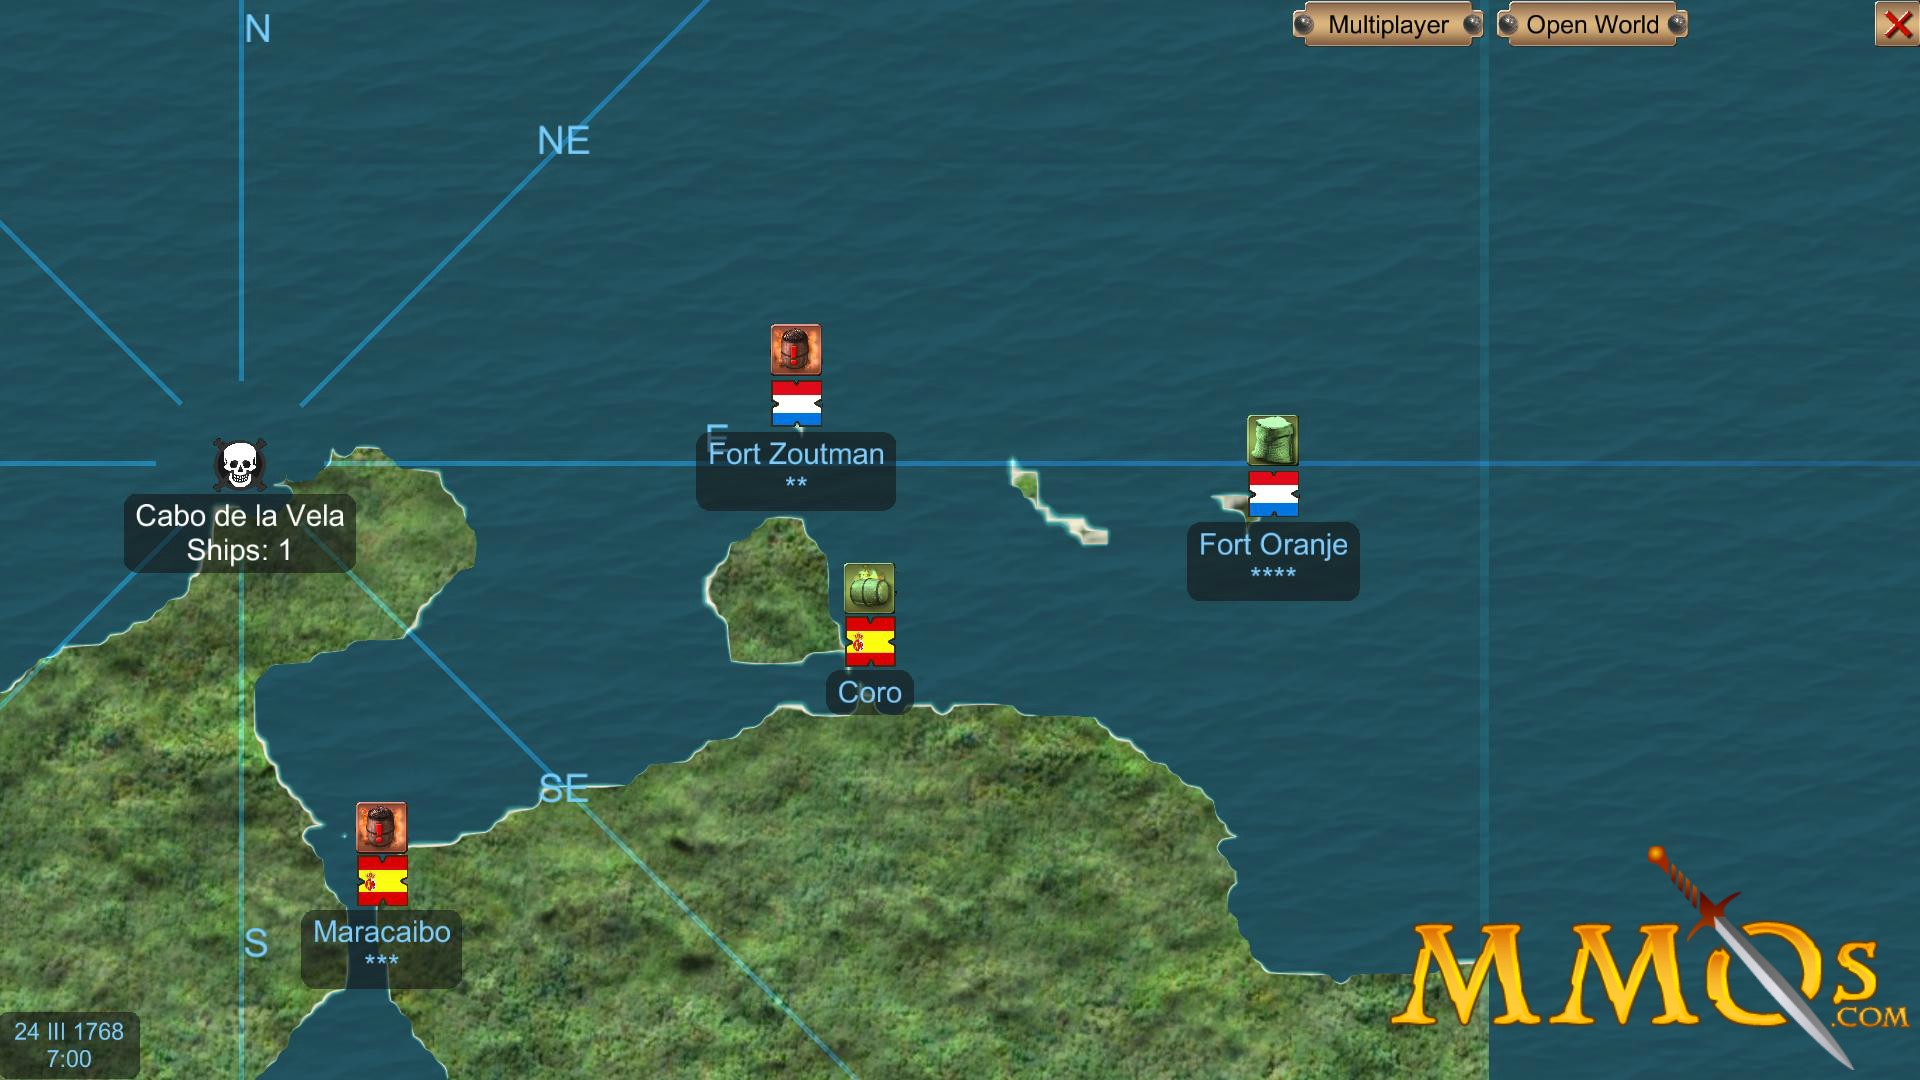 the pirate caribbean hunt map shows a treasure located about 36 miles north of barranquilla port